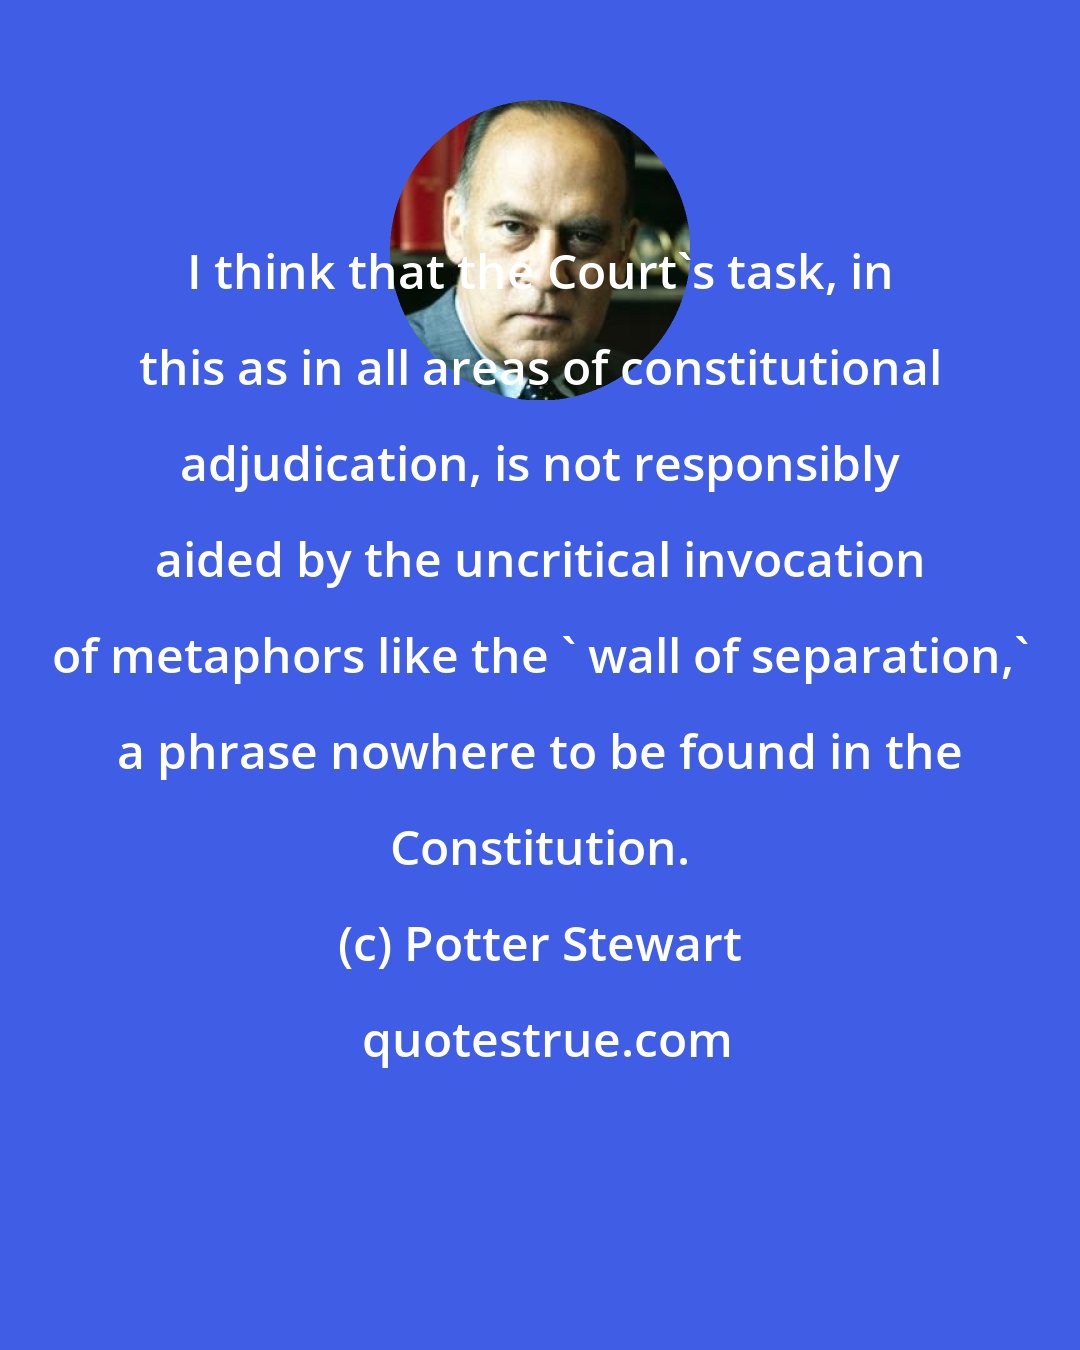 Potter Stewart: I think that the Court's task, in this as in all areas of constitutional adjudication, is not responsibly aided by the uncritical invocation of metaphors like the ' wall of separation,' a phrase nowhere to be found in the Constitution.